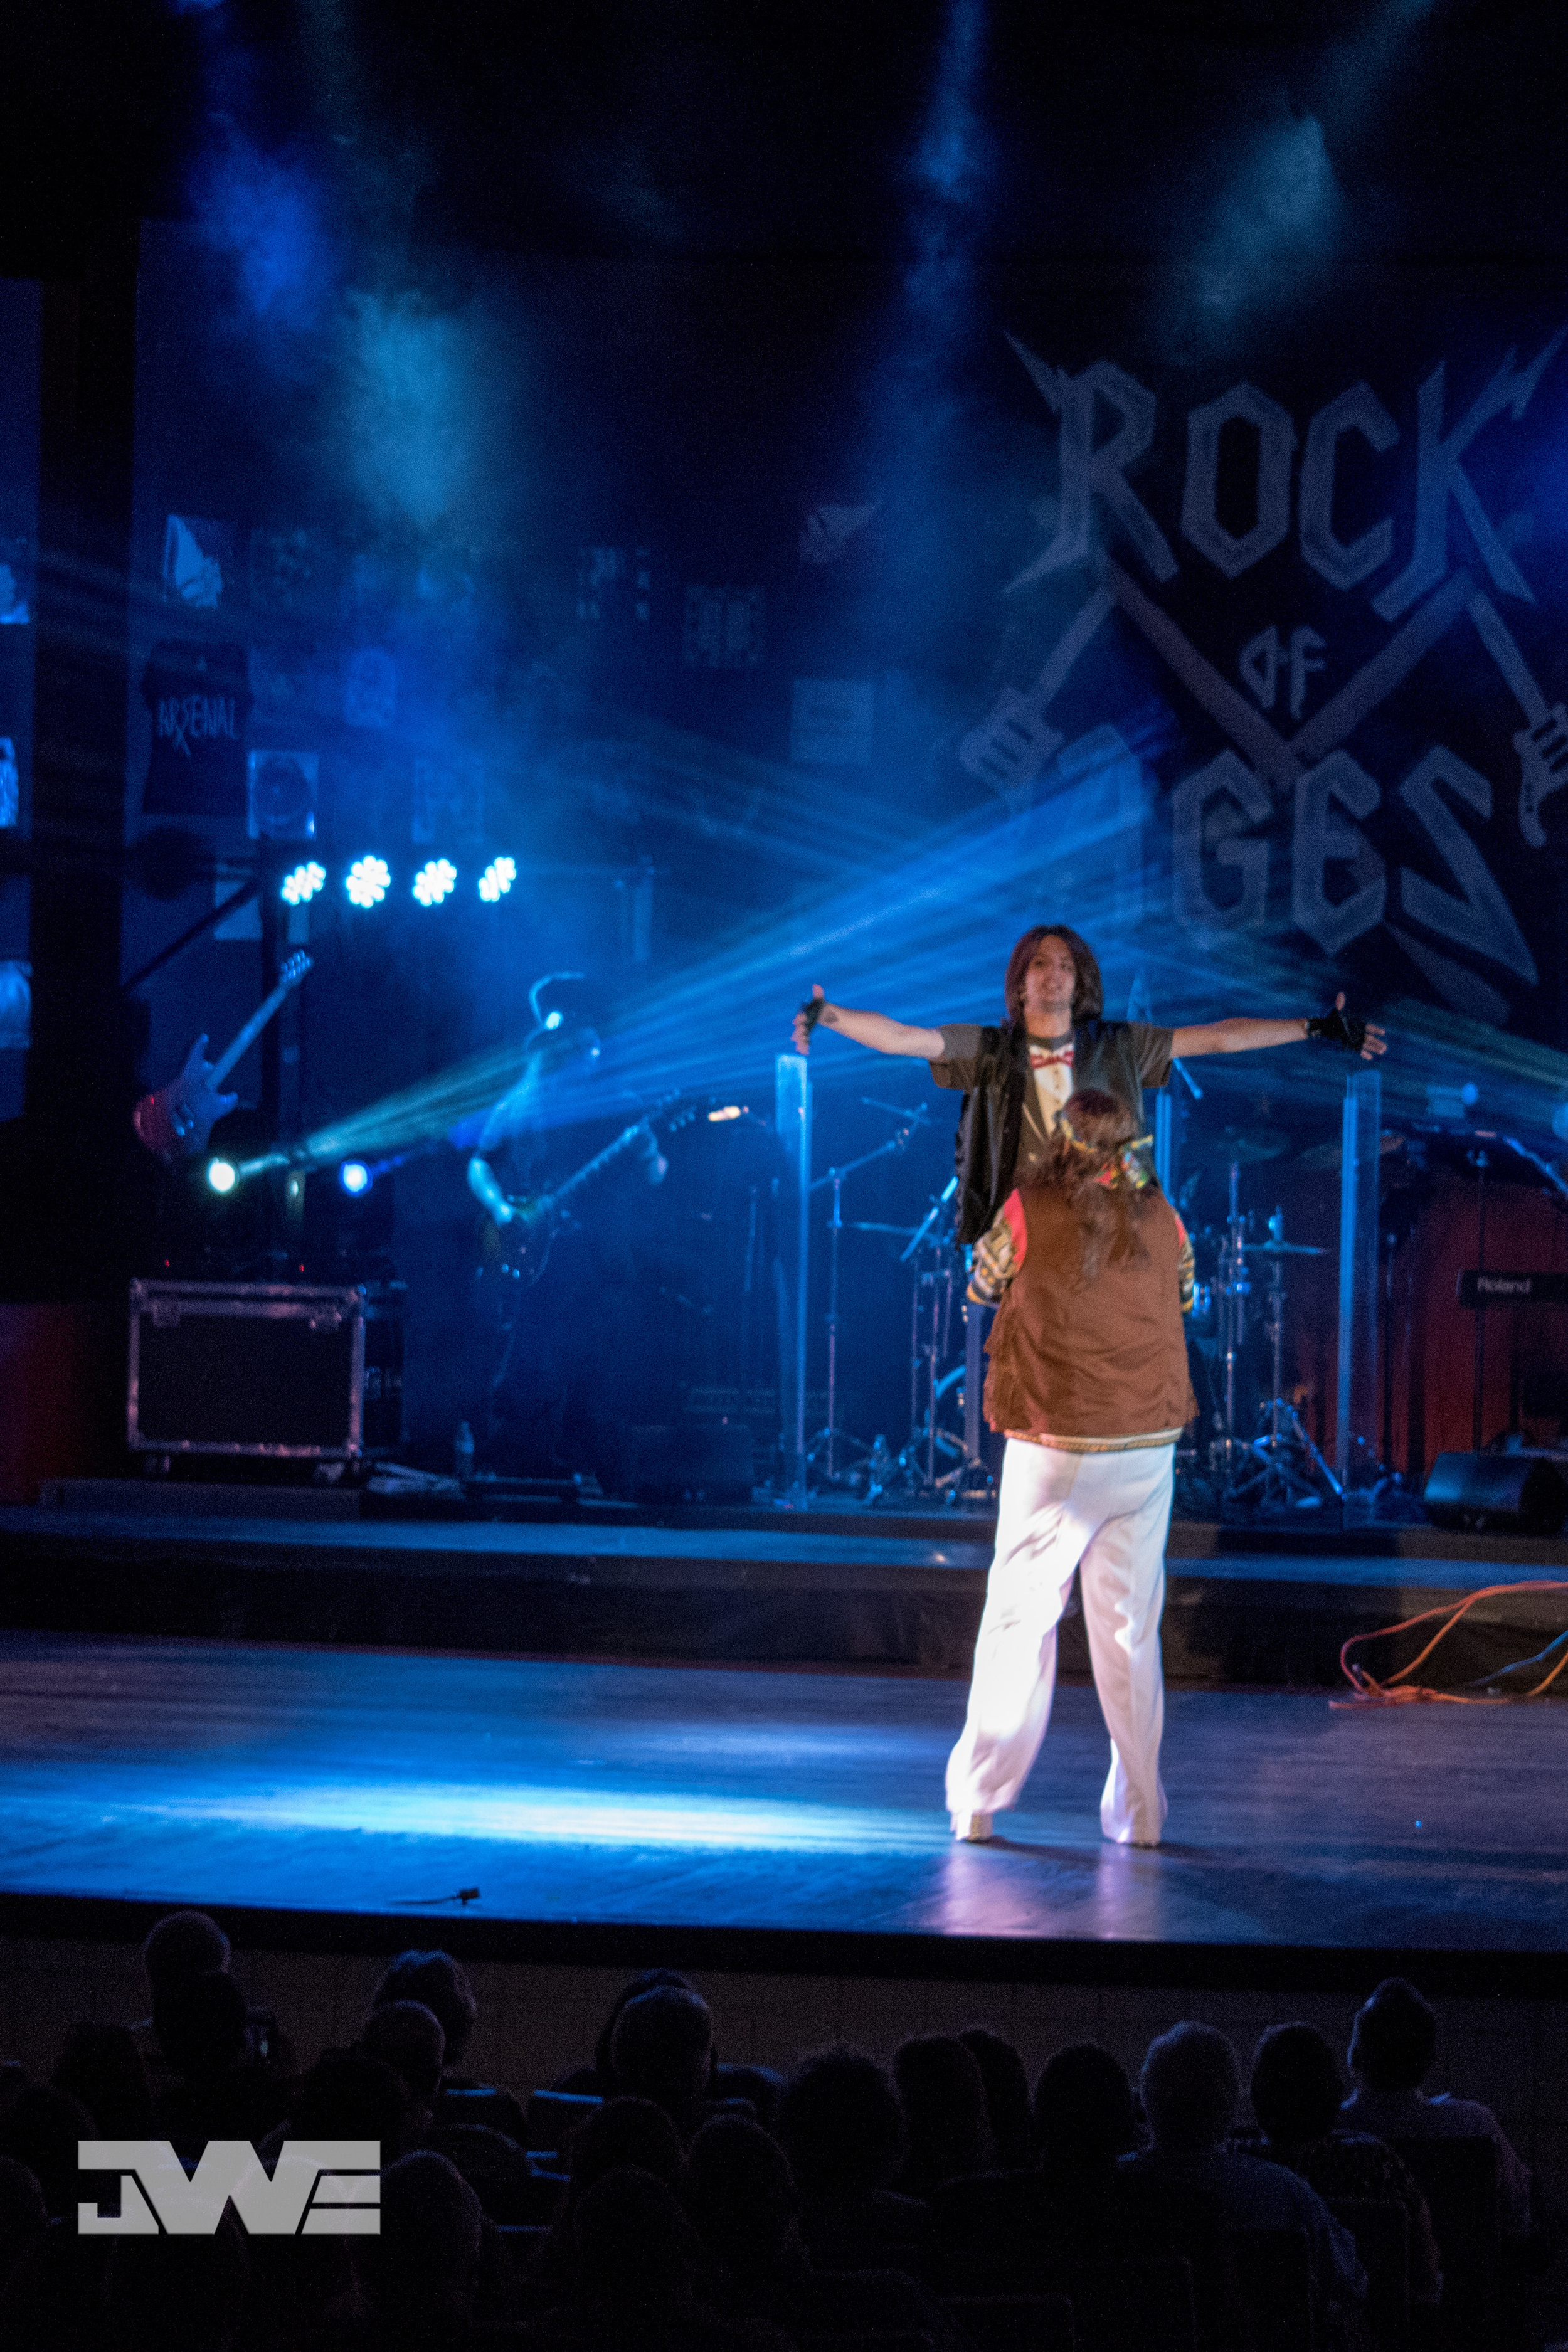 Rock of Ages -0150.jpg